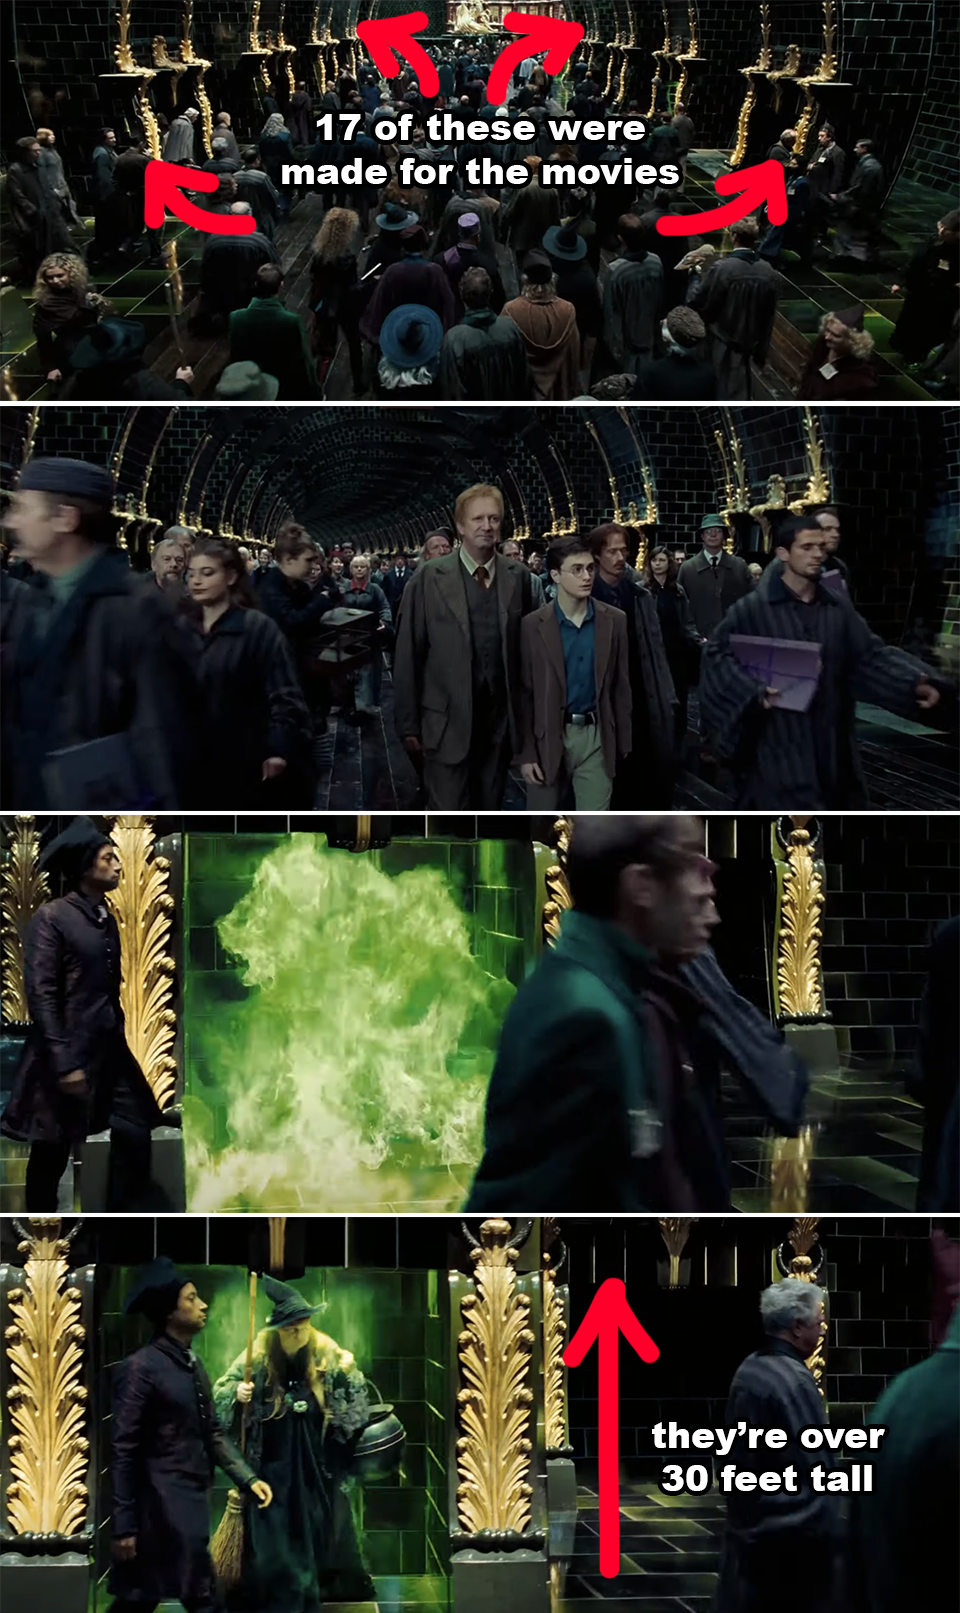 Image from a Harry Potter film showing the interior of the Ministry of Magic with actors walking among large, ornate pillars and green magical flame